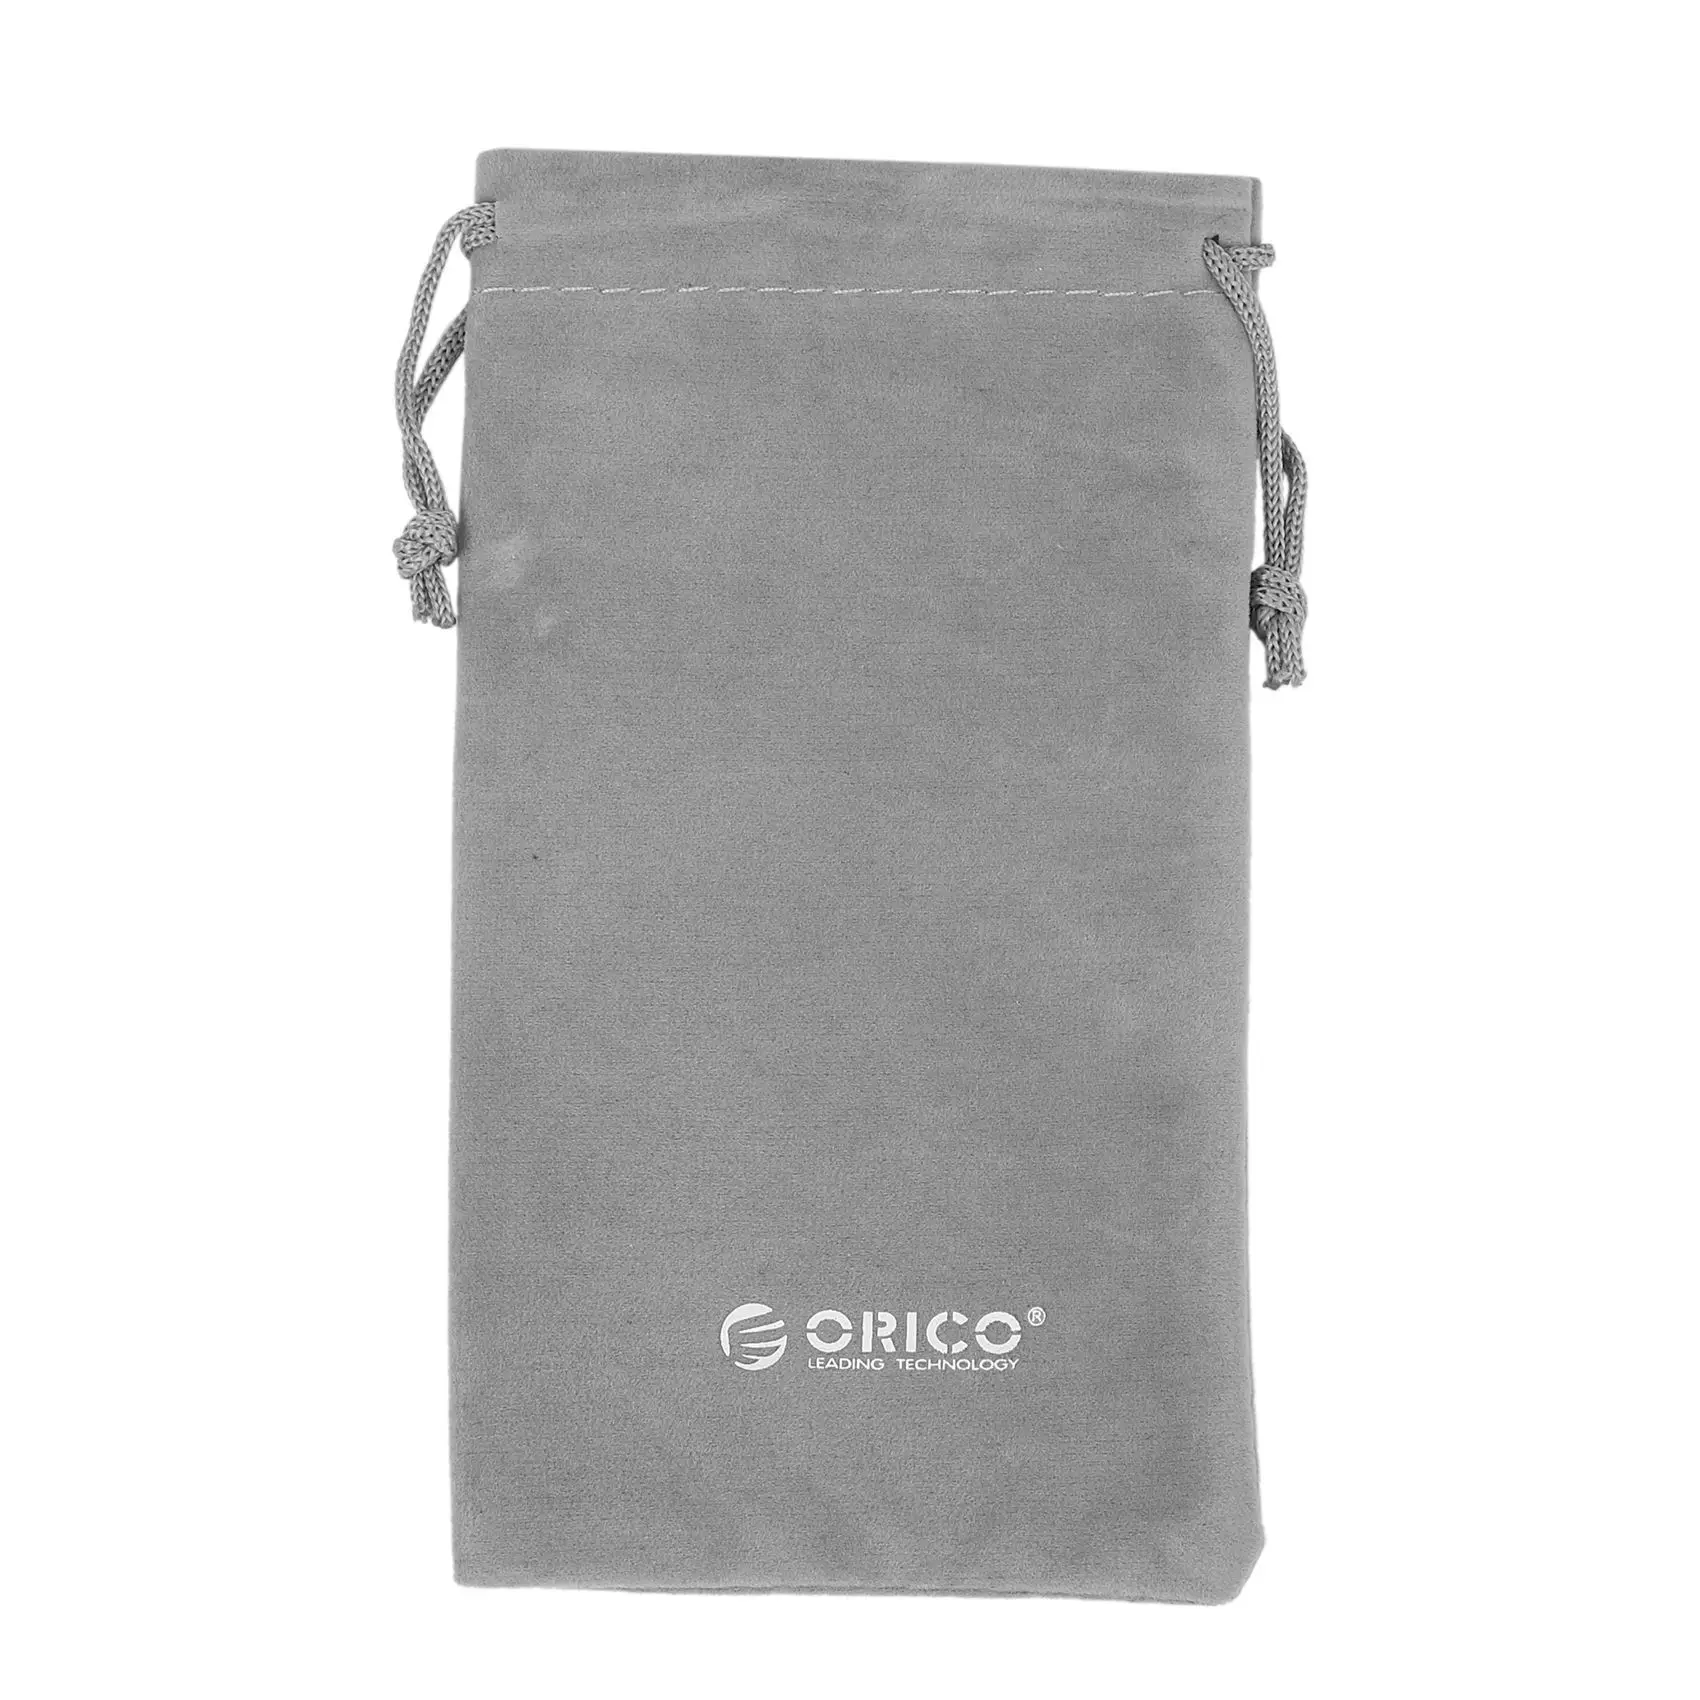 

Orico Waterproof 180X100Mm Mobile Phone Hdd Gray Bag Storage For Usb Charger Usb Cable Power Bank Phone Storage Box Case